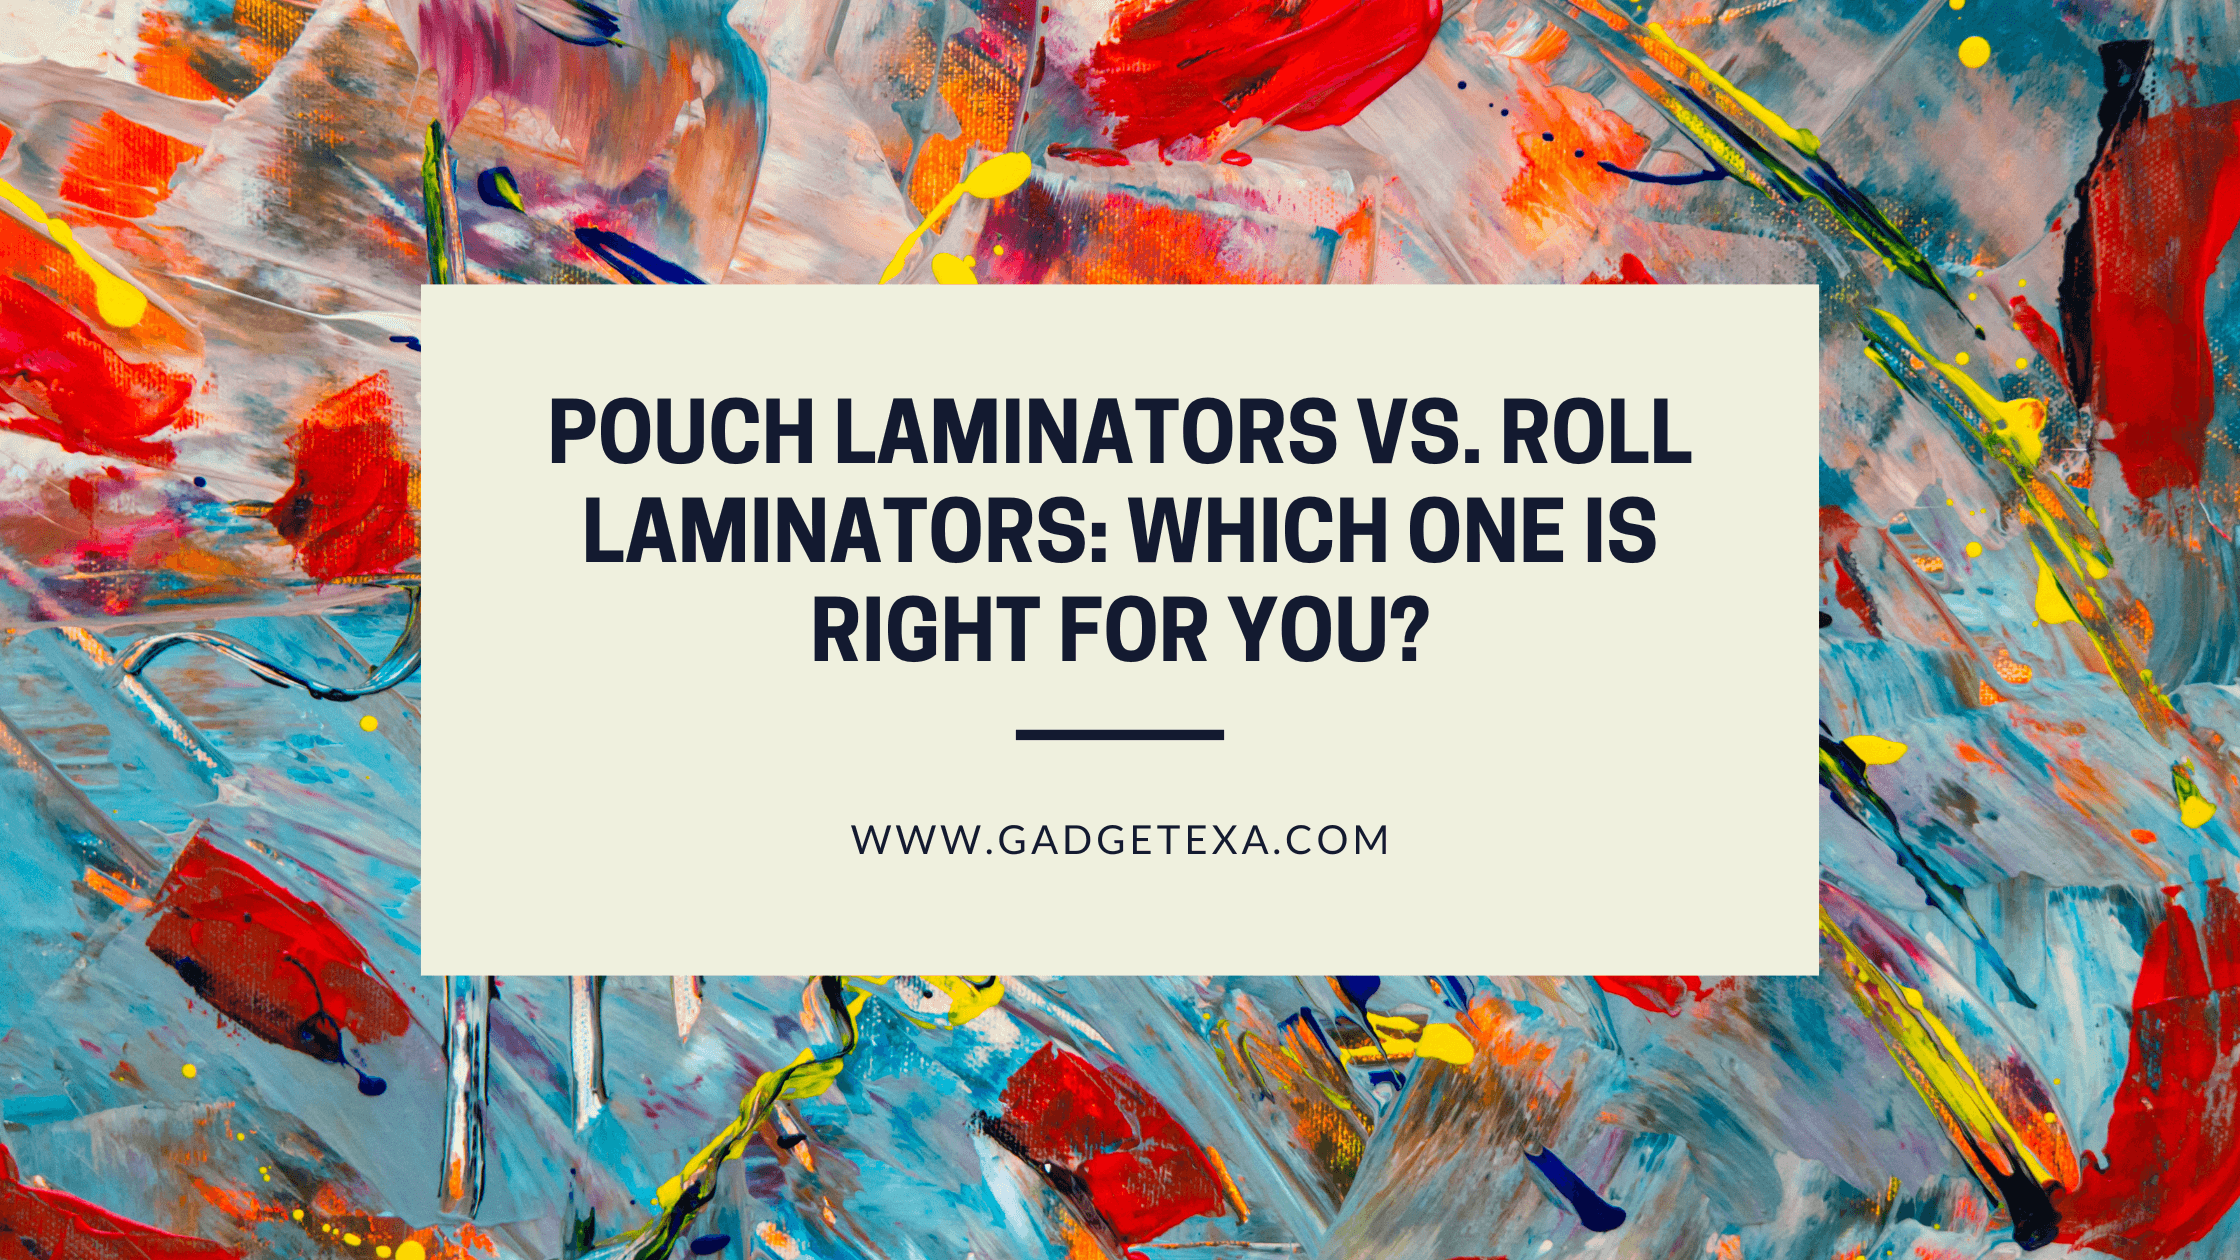 You are currently viewing Pouch Laminators vs. Roll Laminators: Which One is Right for You?